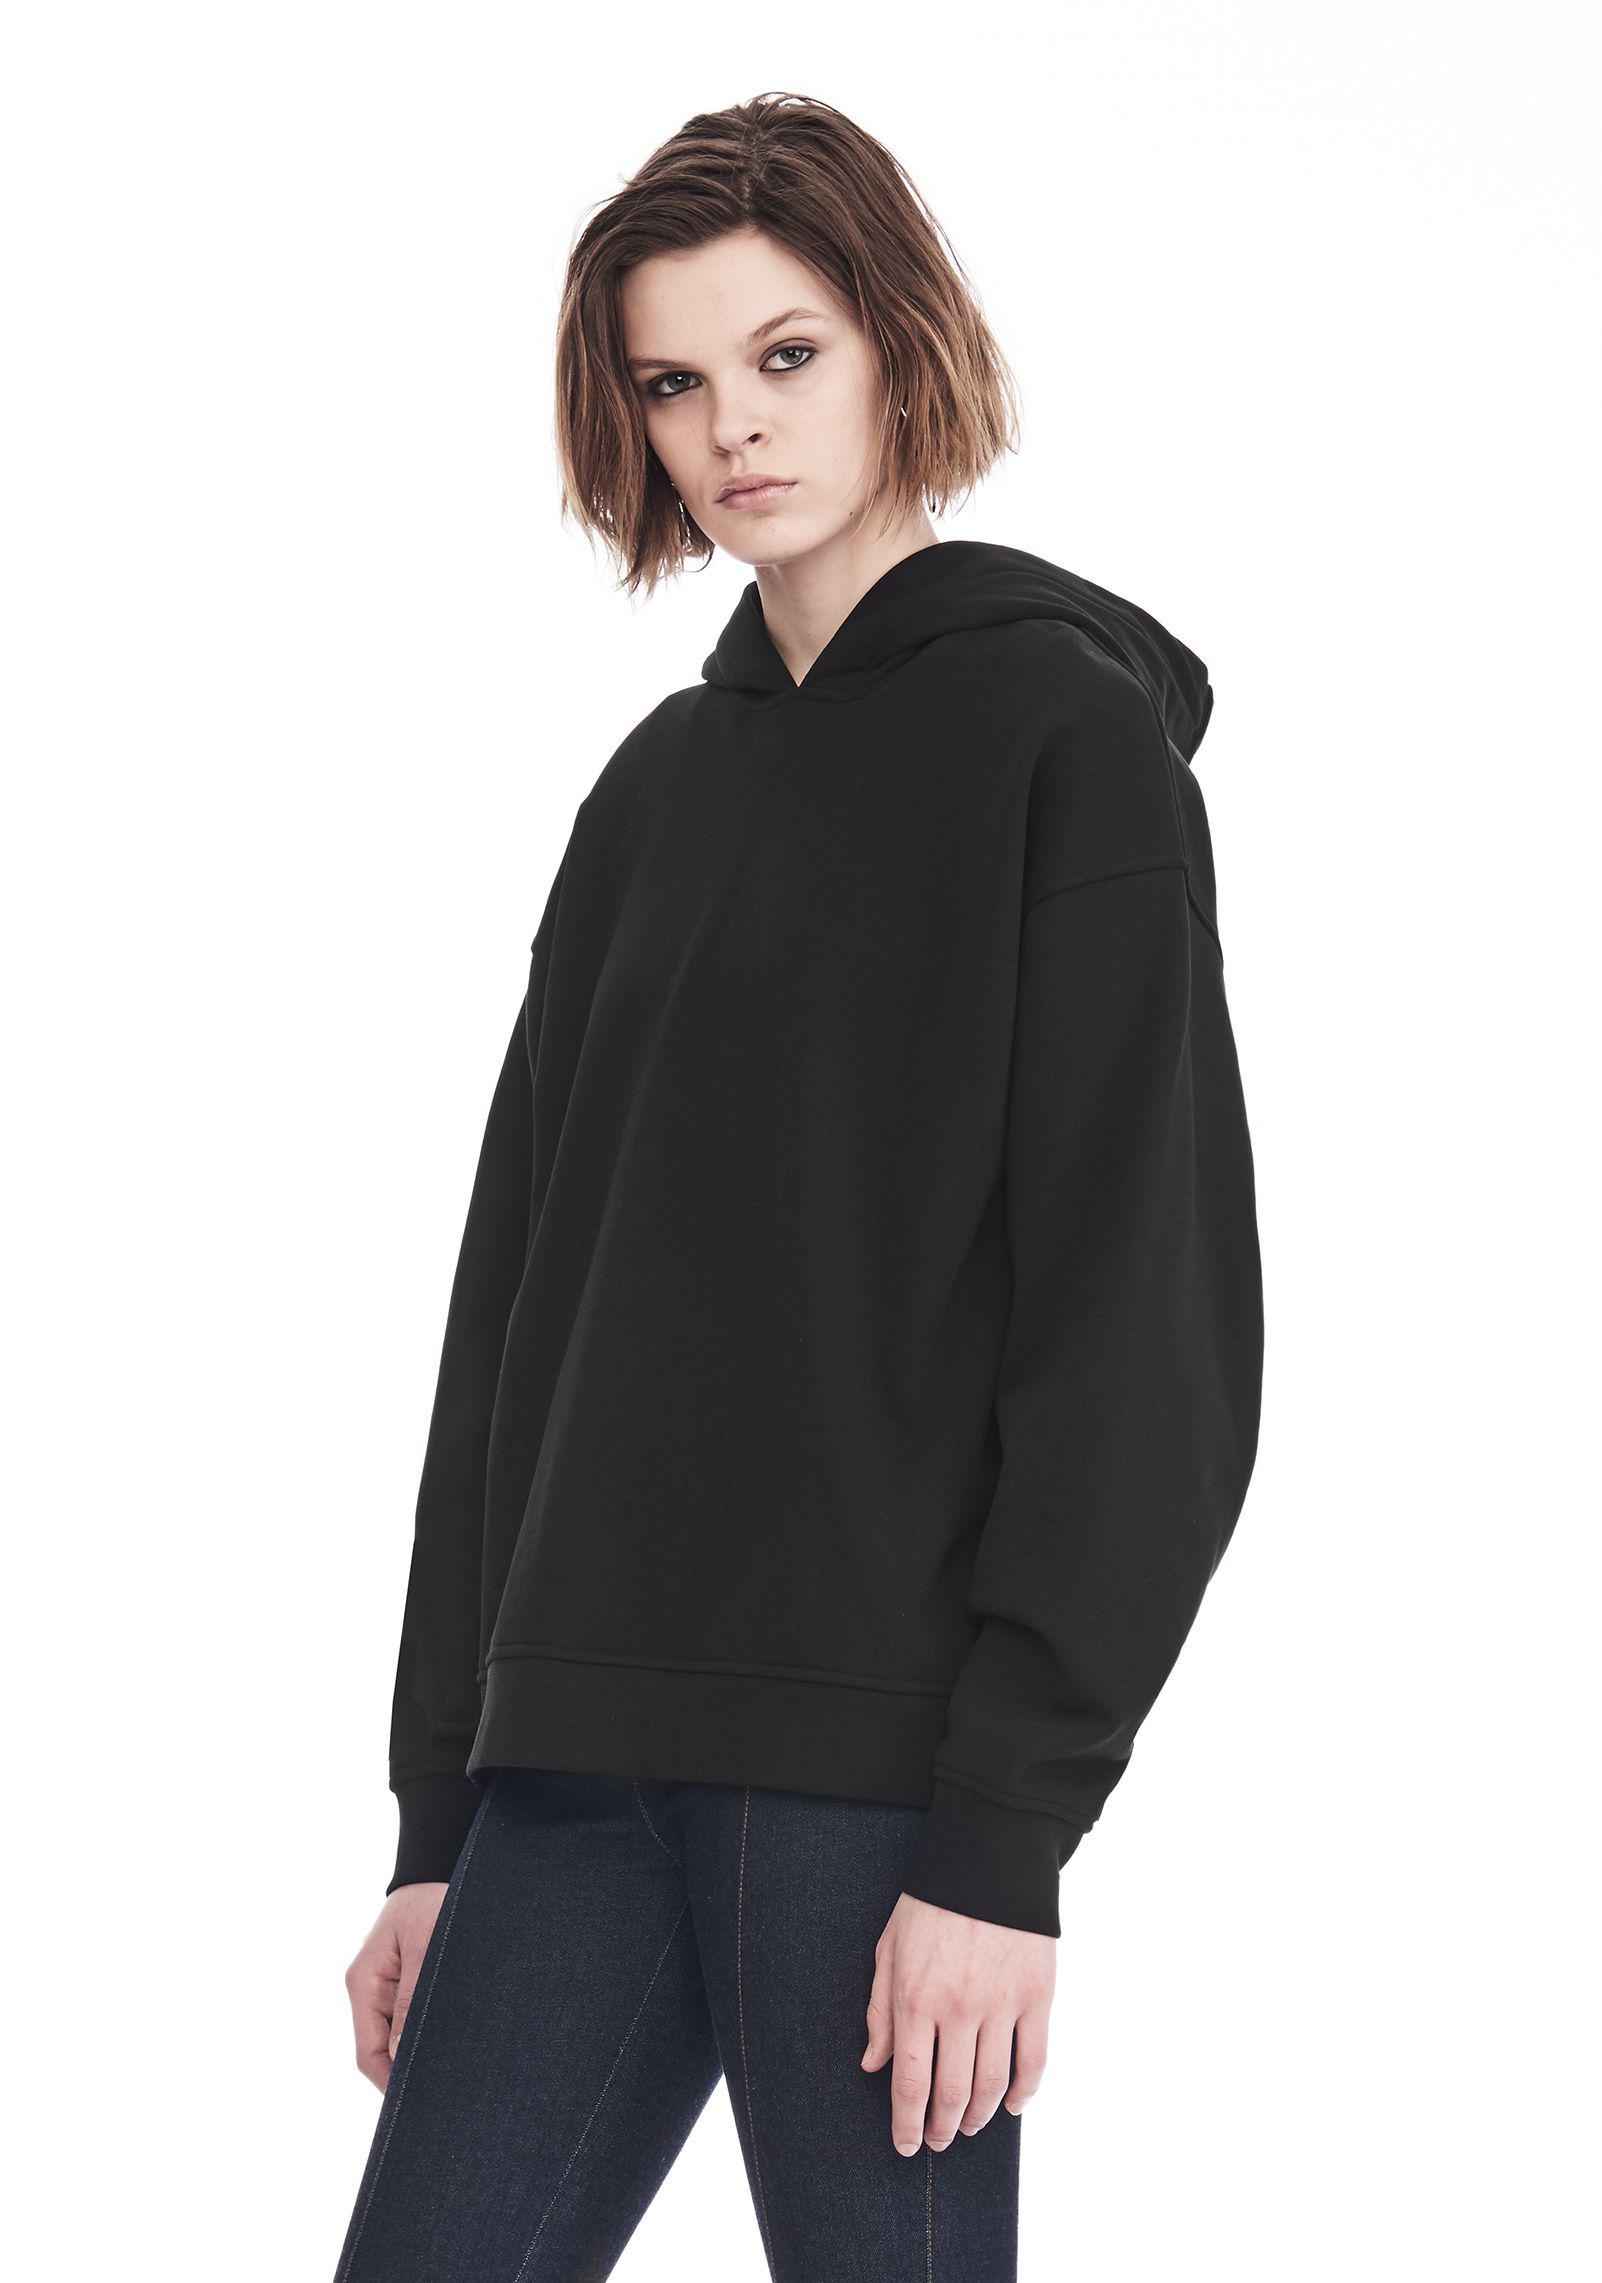 Lyst - Alexander wang Exclusive Oversized Hoodie With Strict Patch in Black